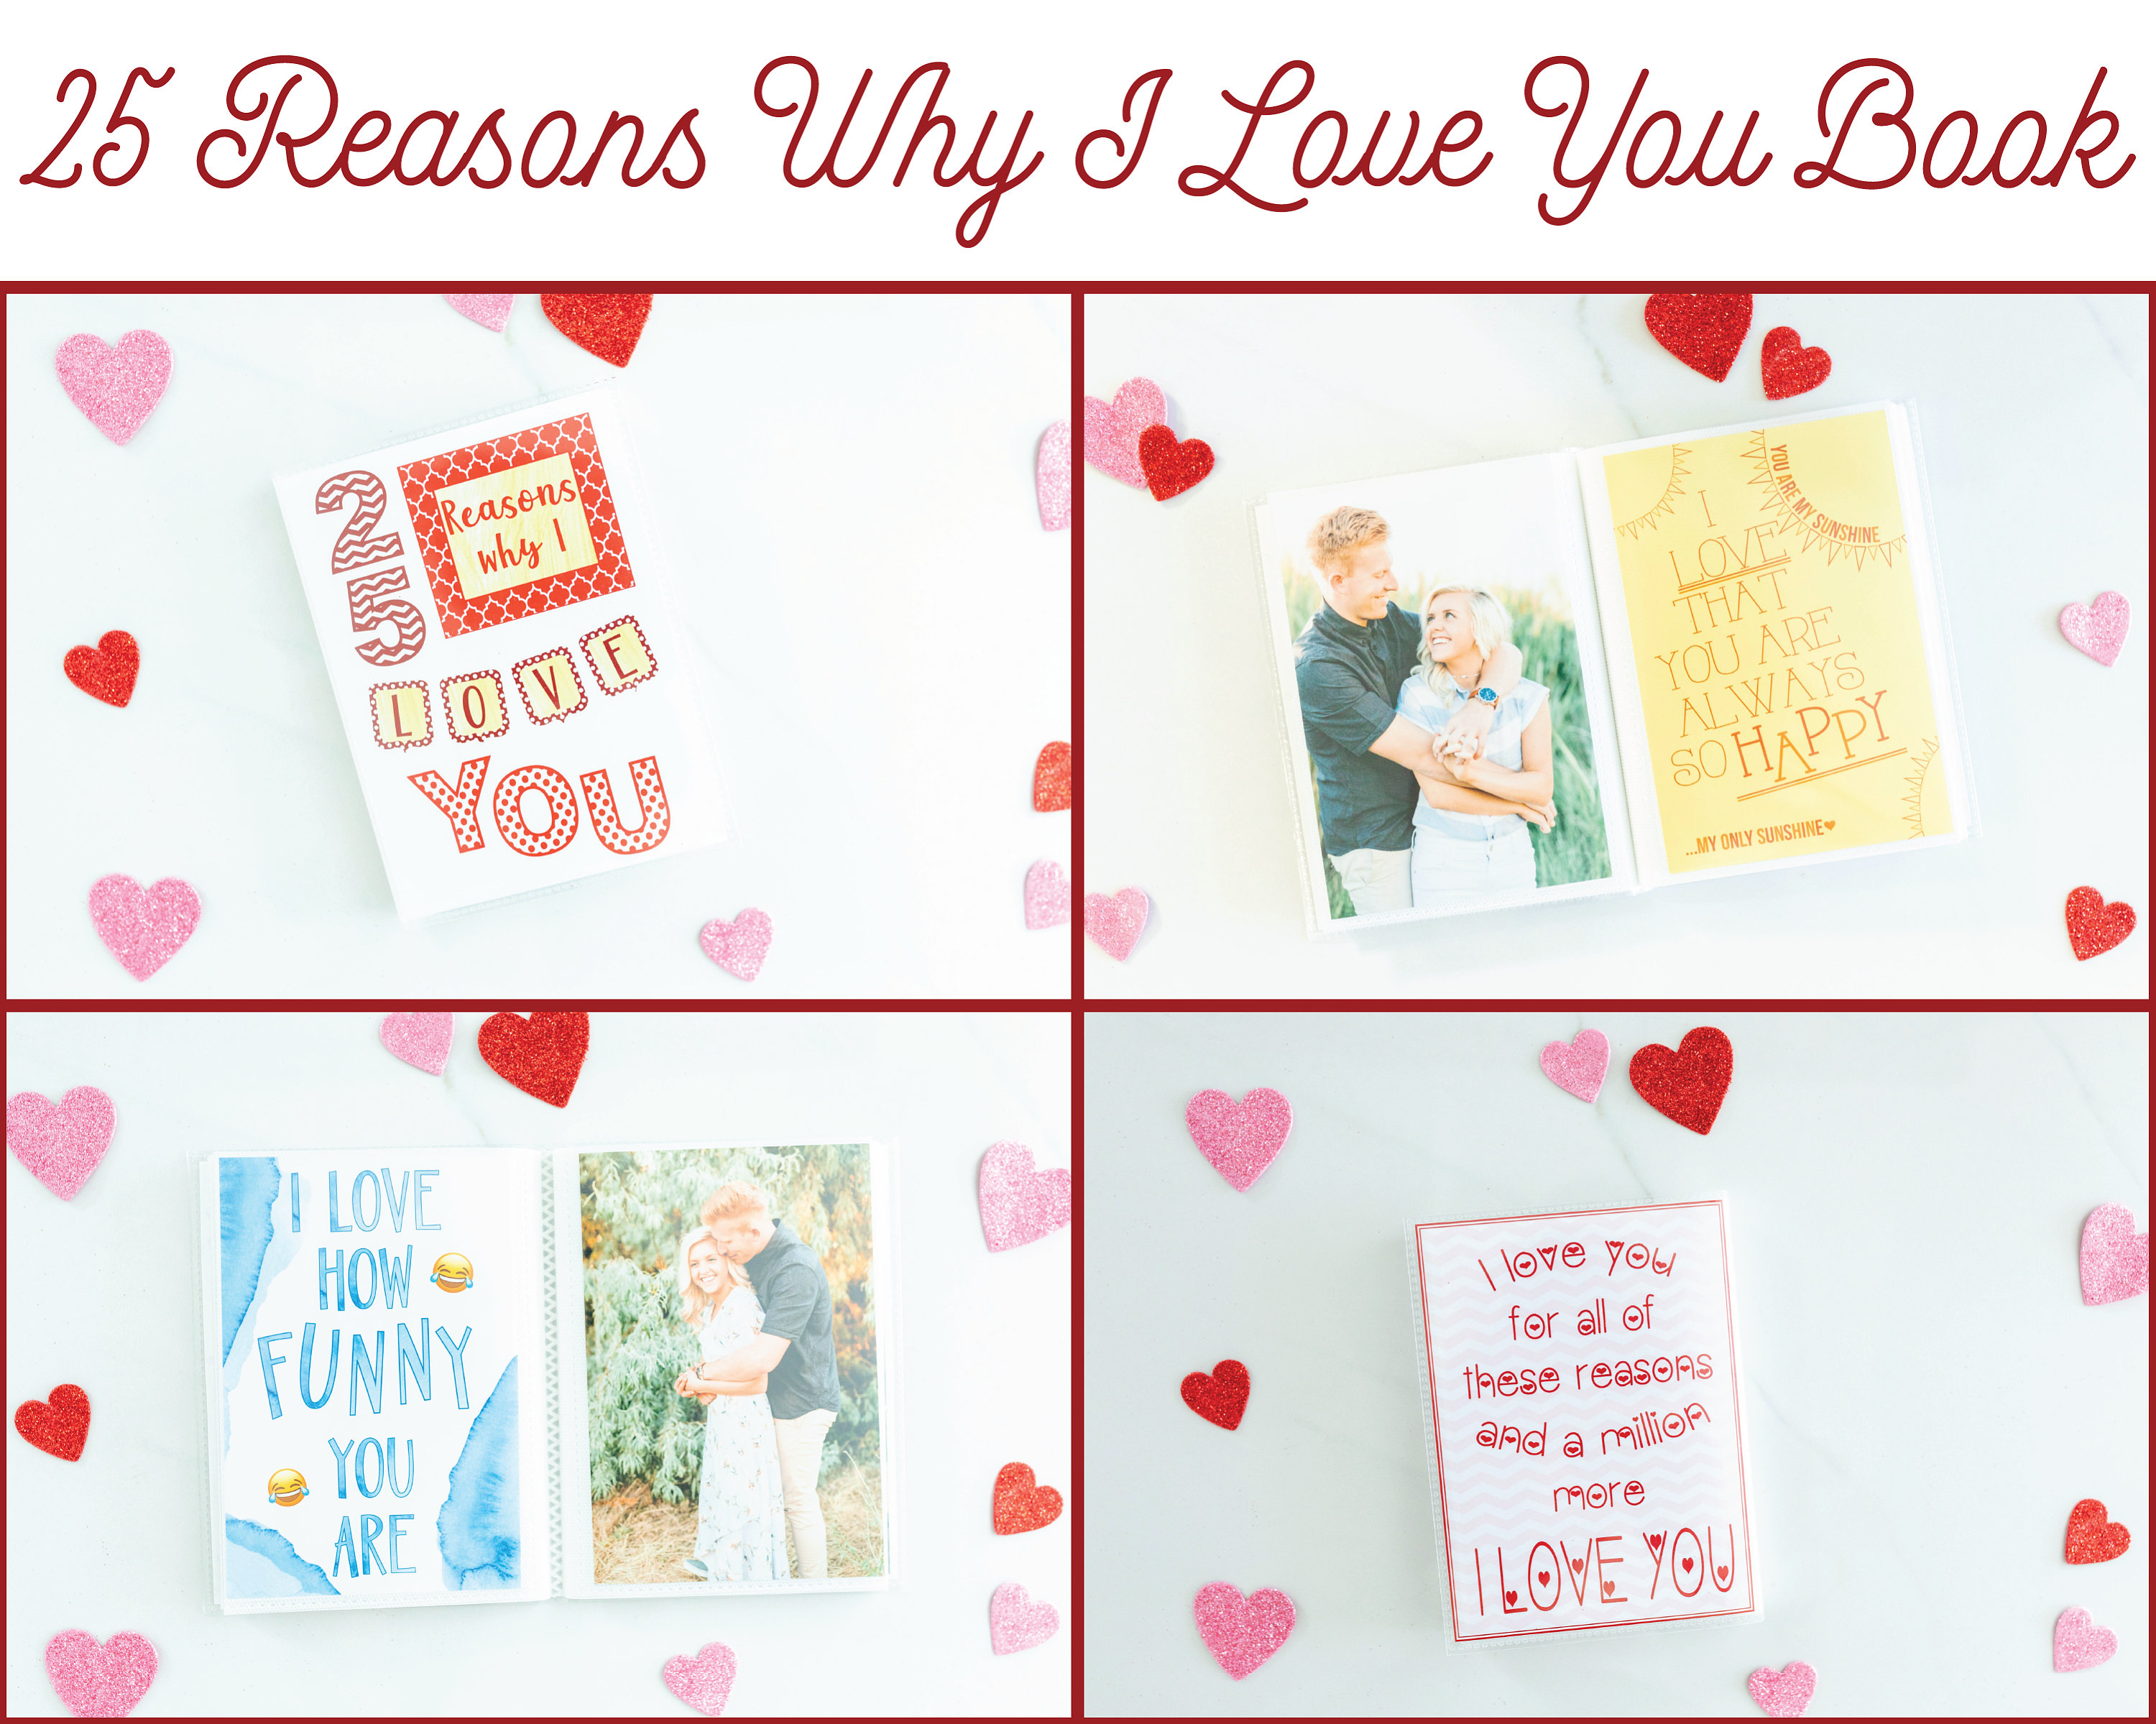 Ten Reasons I Love You, Personalized Love Book